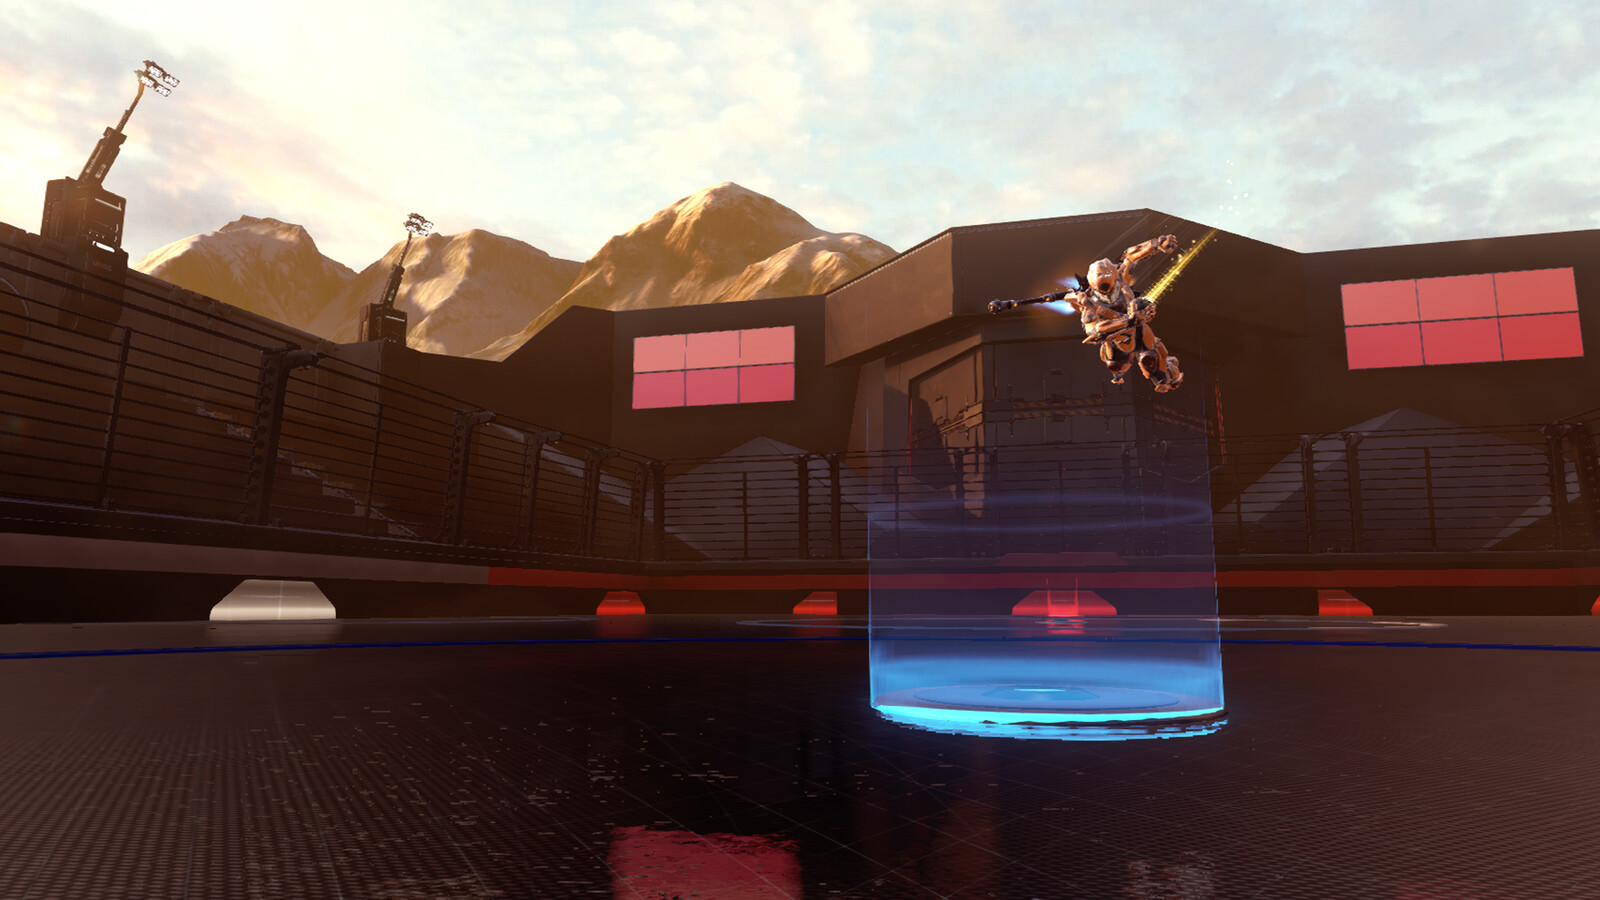 Environment Art &amp; Promotional Image via In-Game Photo Suite
Original Draft of Frontier, Grifball Court used in Halo 5 Matchmaking